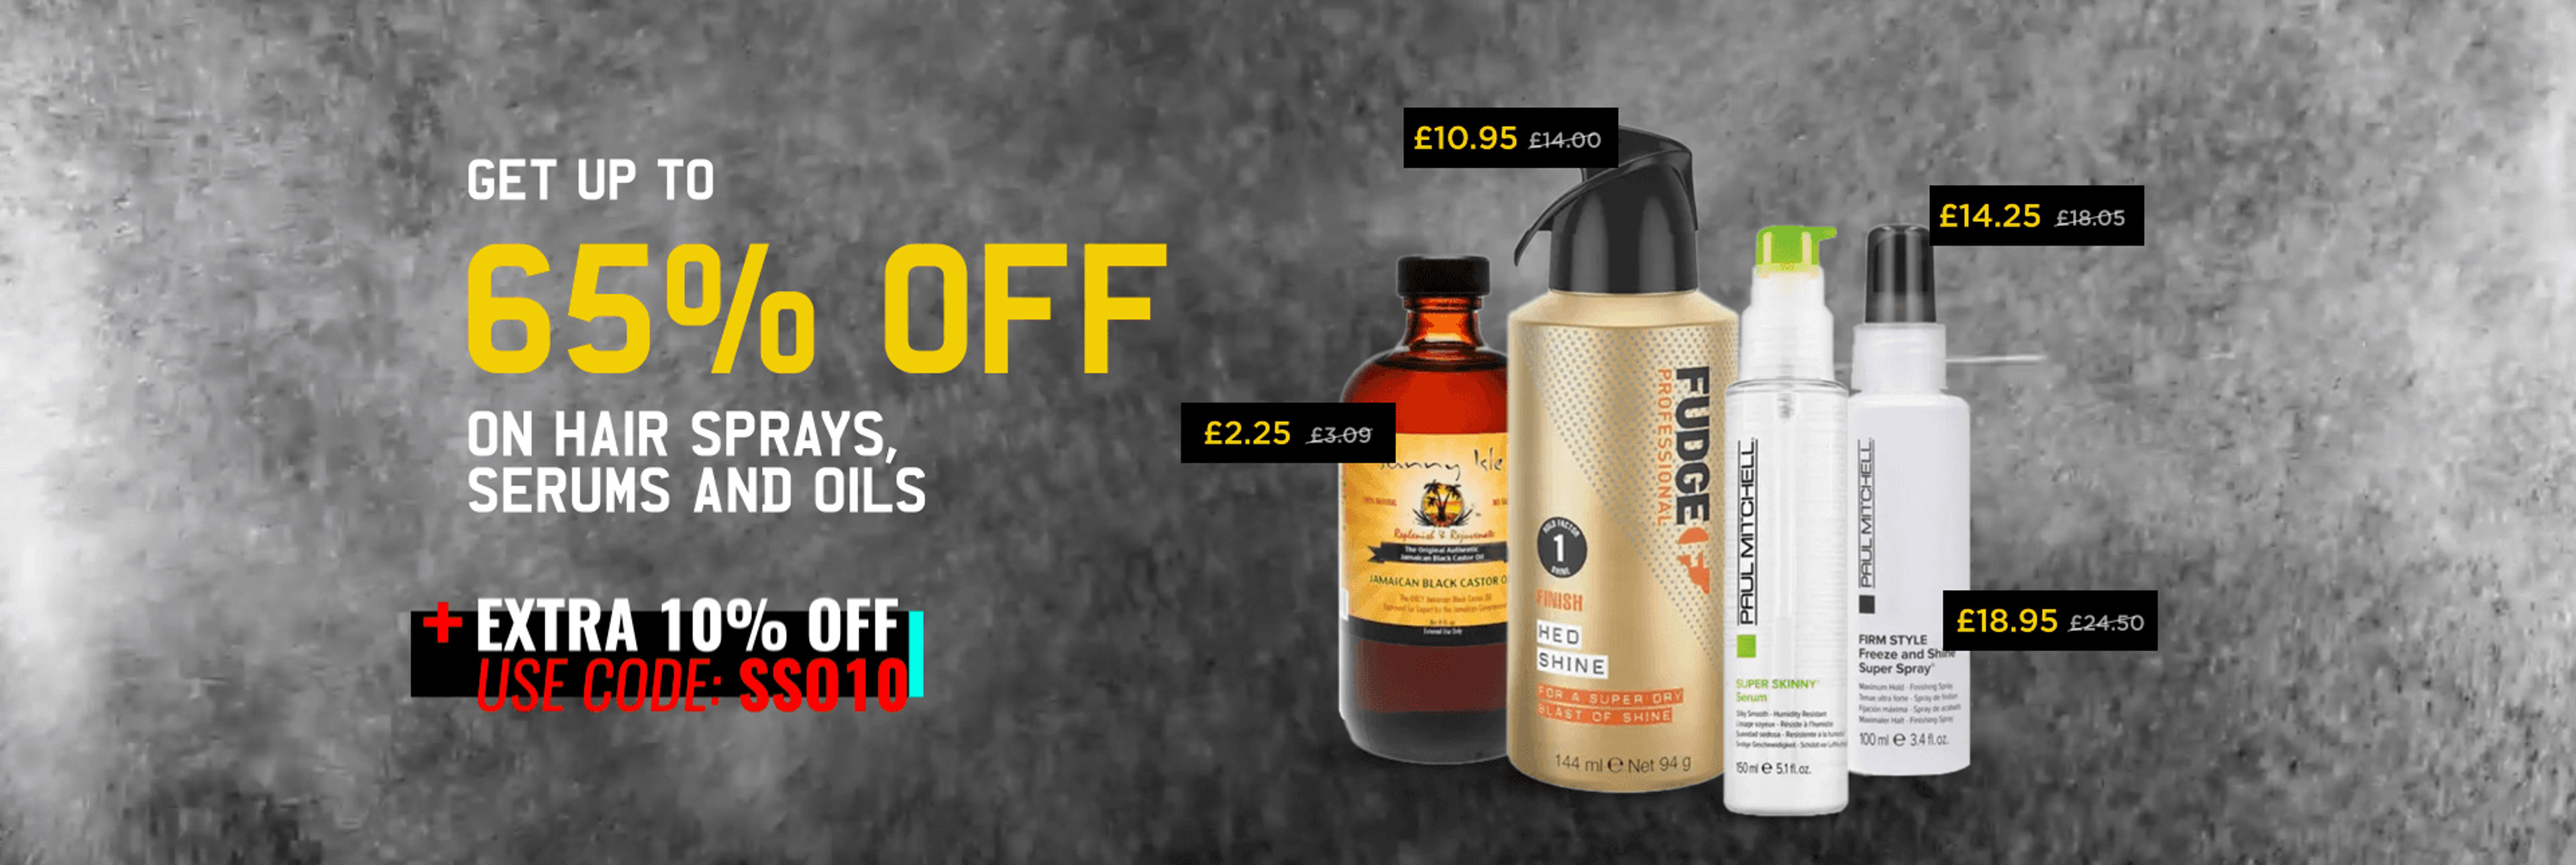 Get Up to 65% off on Hair Sprays, Serums and Oils 